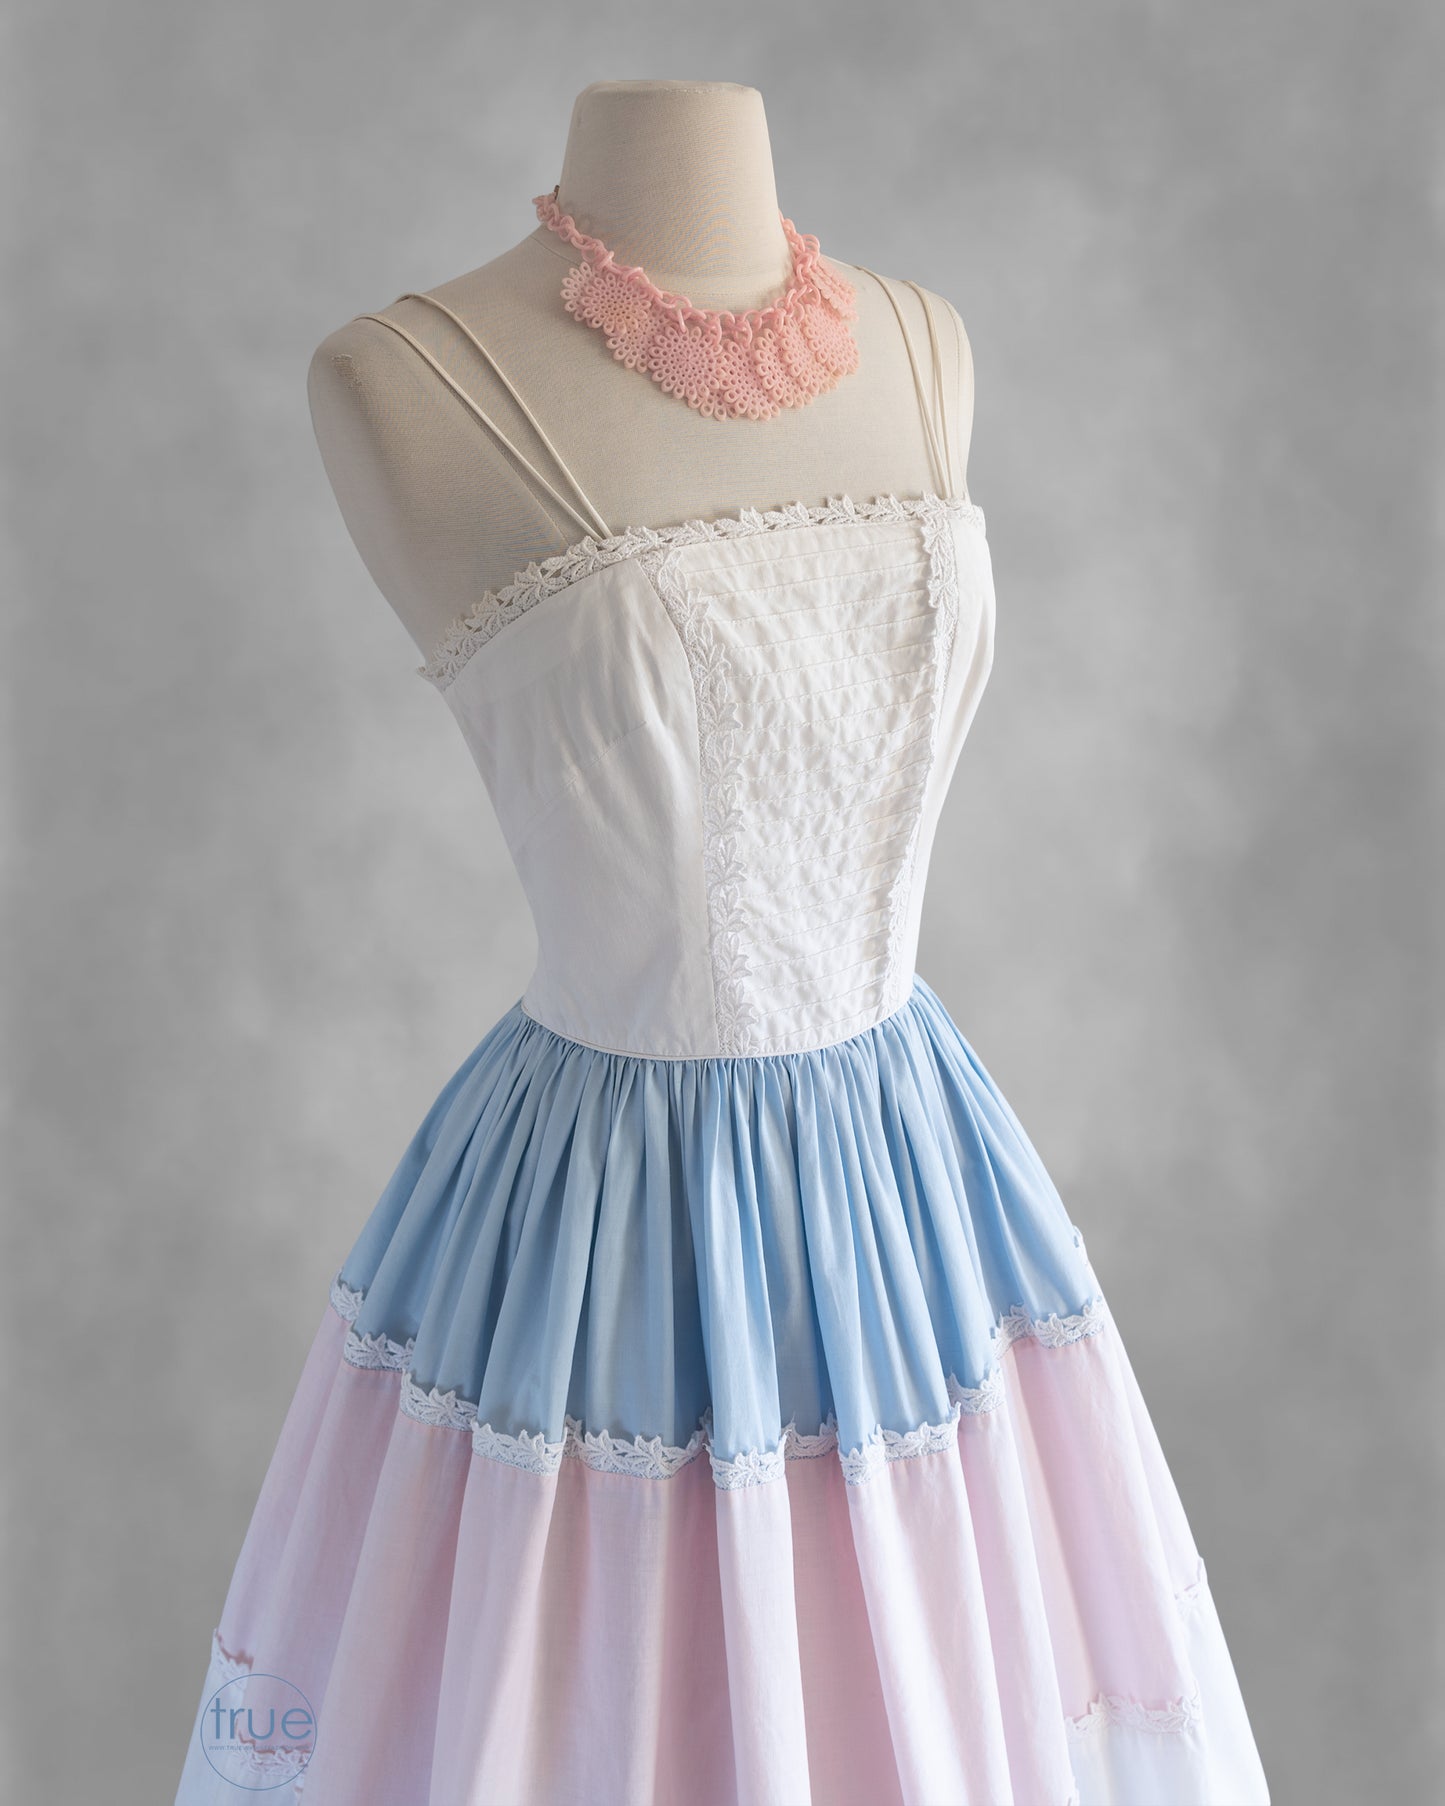 vintage 1950's dress ...sweetest EVER an Arkay white pink & blue cotton sundress